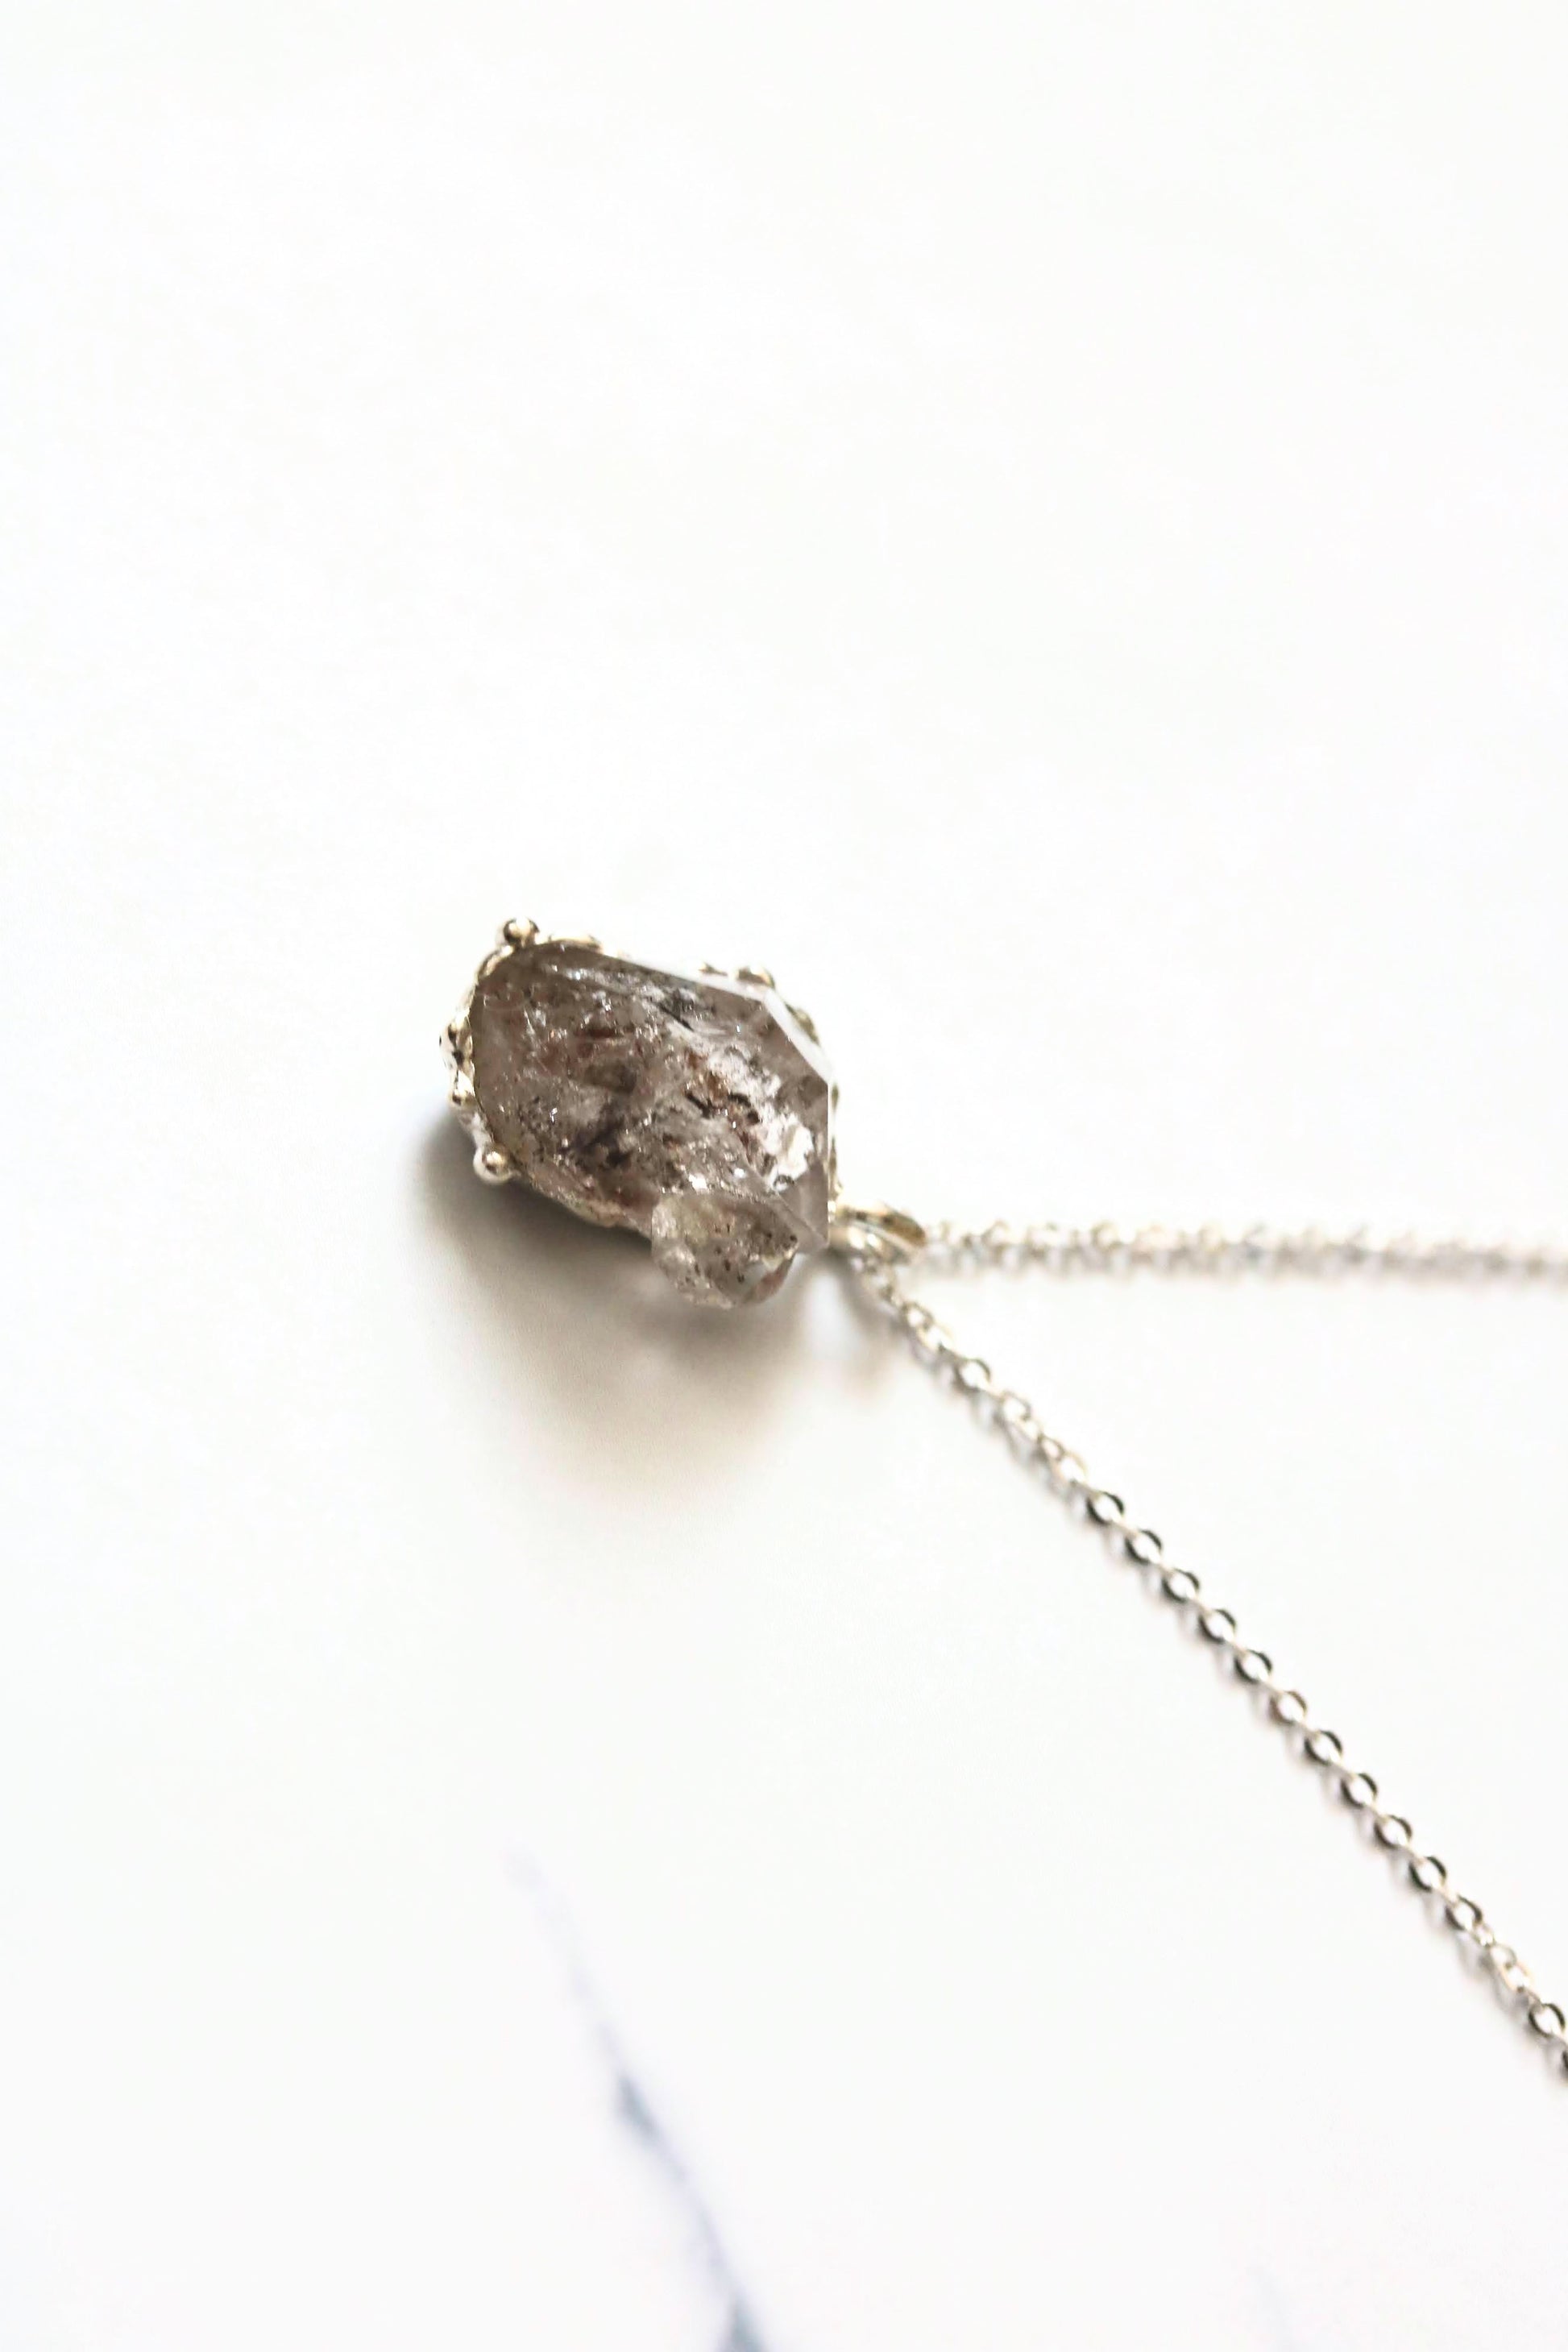 natural herkimer diamond with inclusion